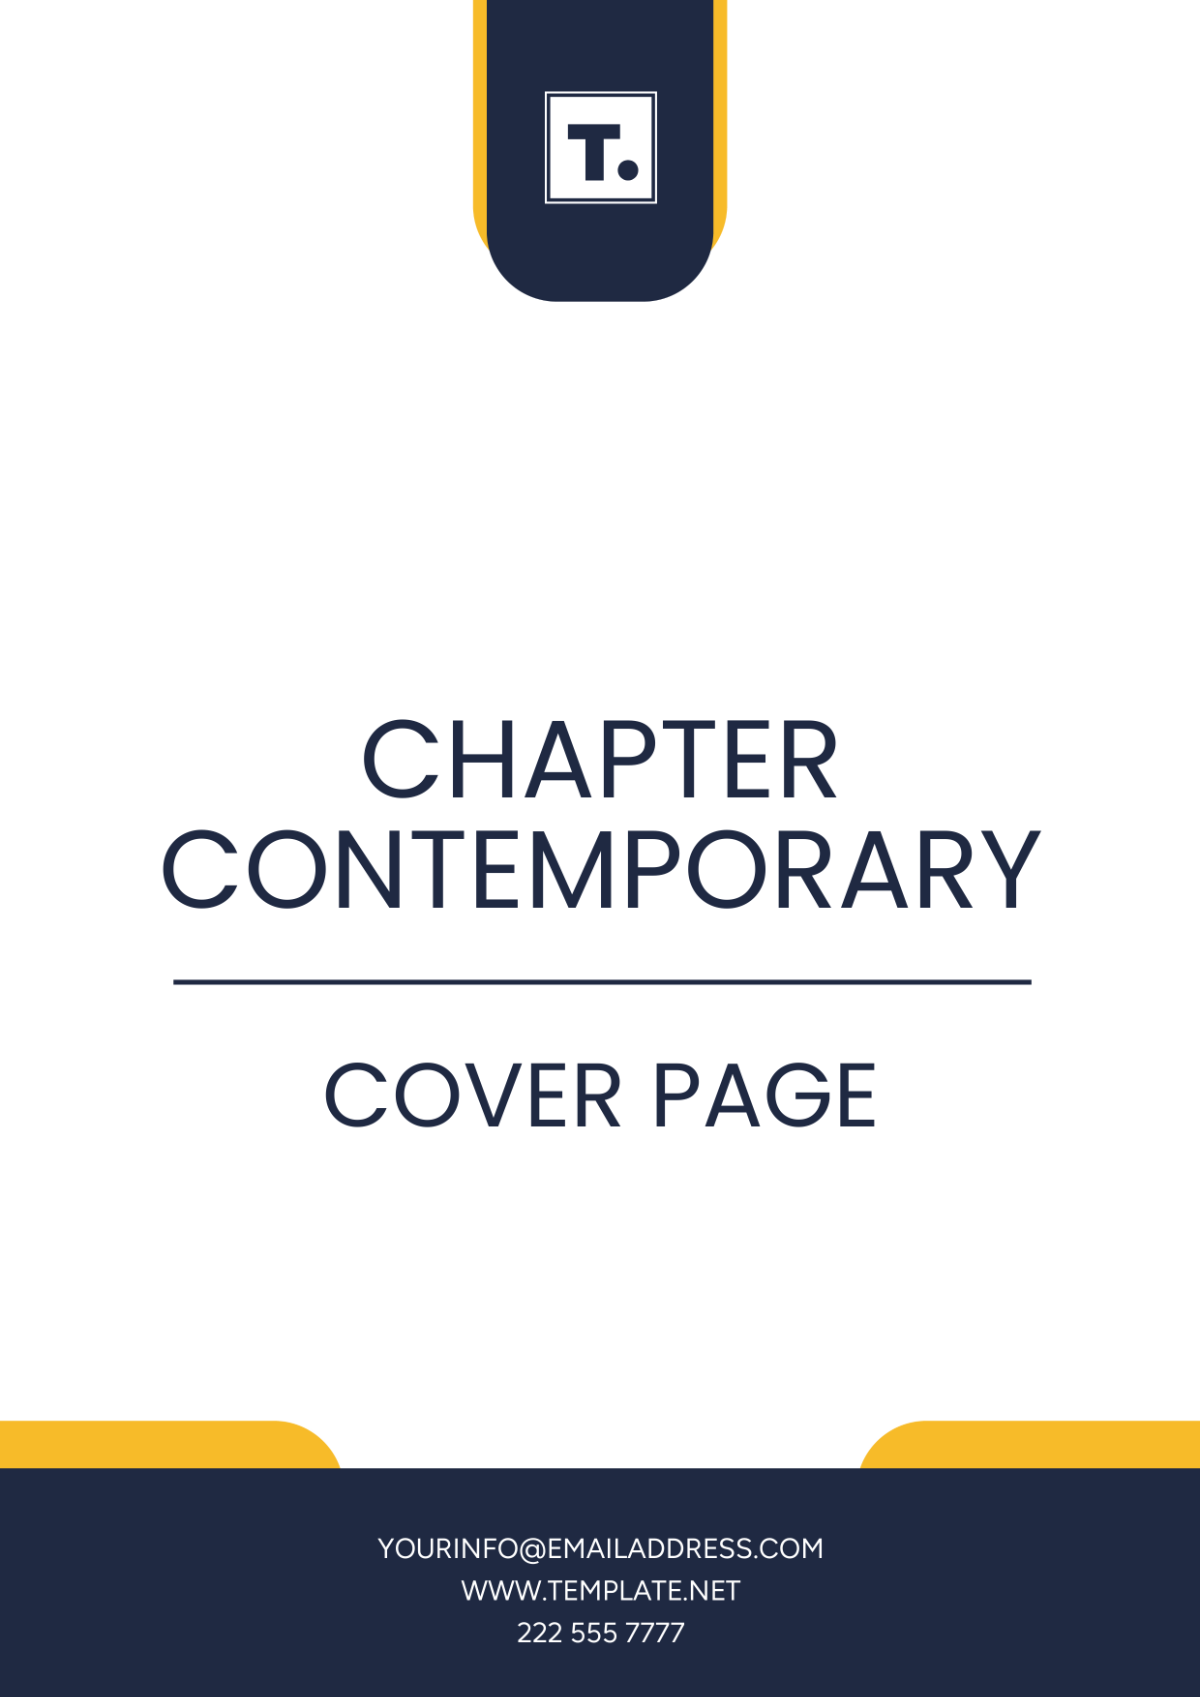 Chapter Contemporary Cover Page Template